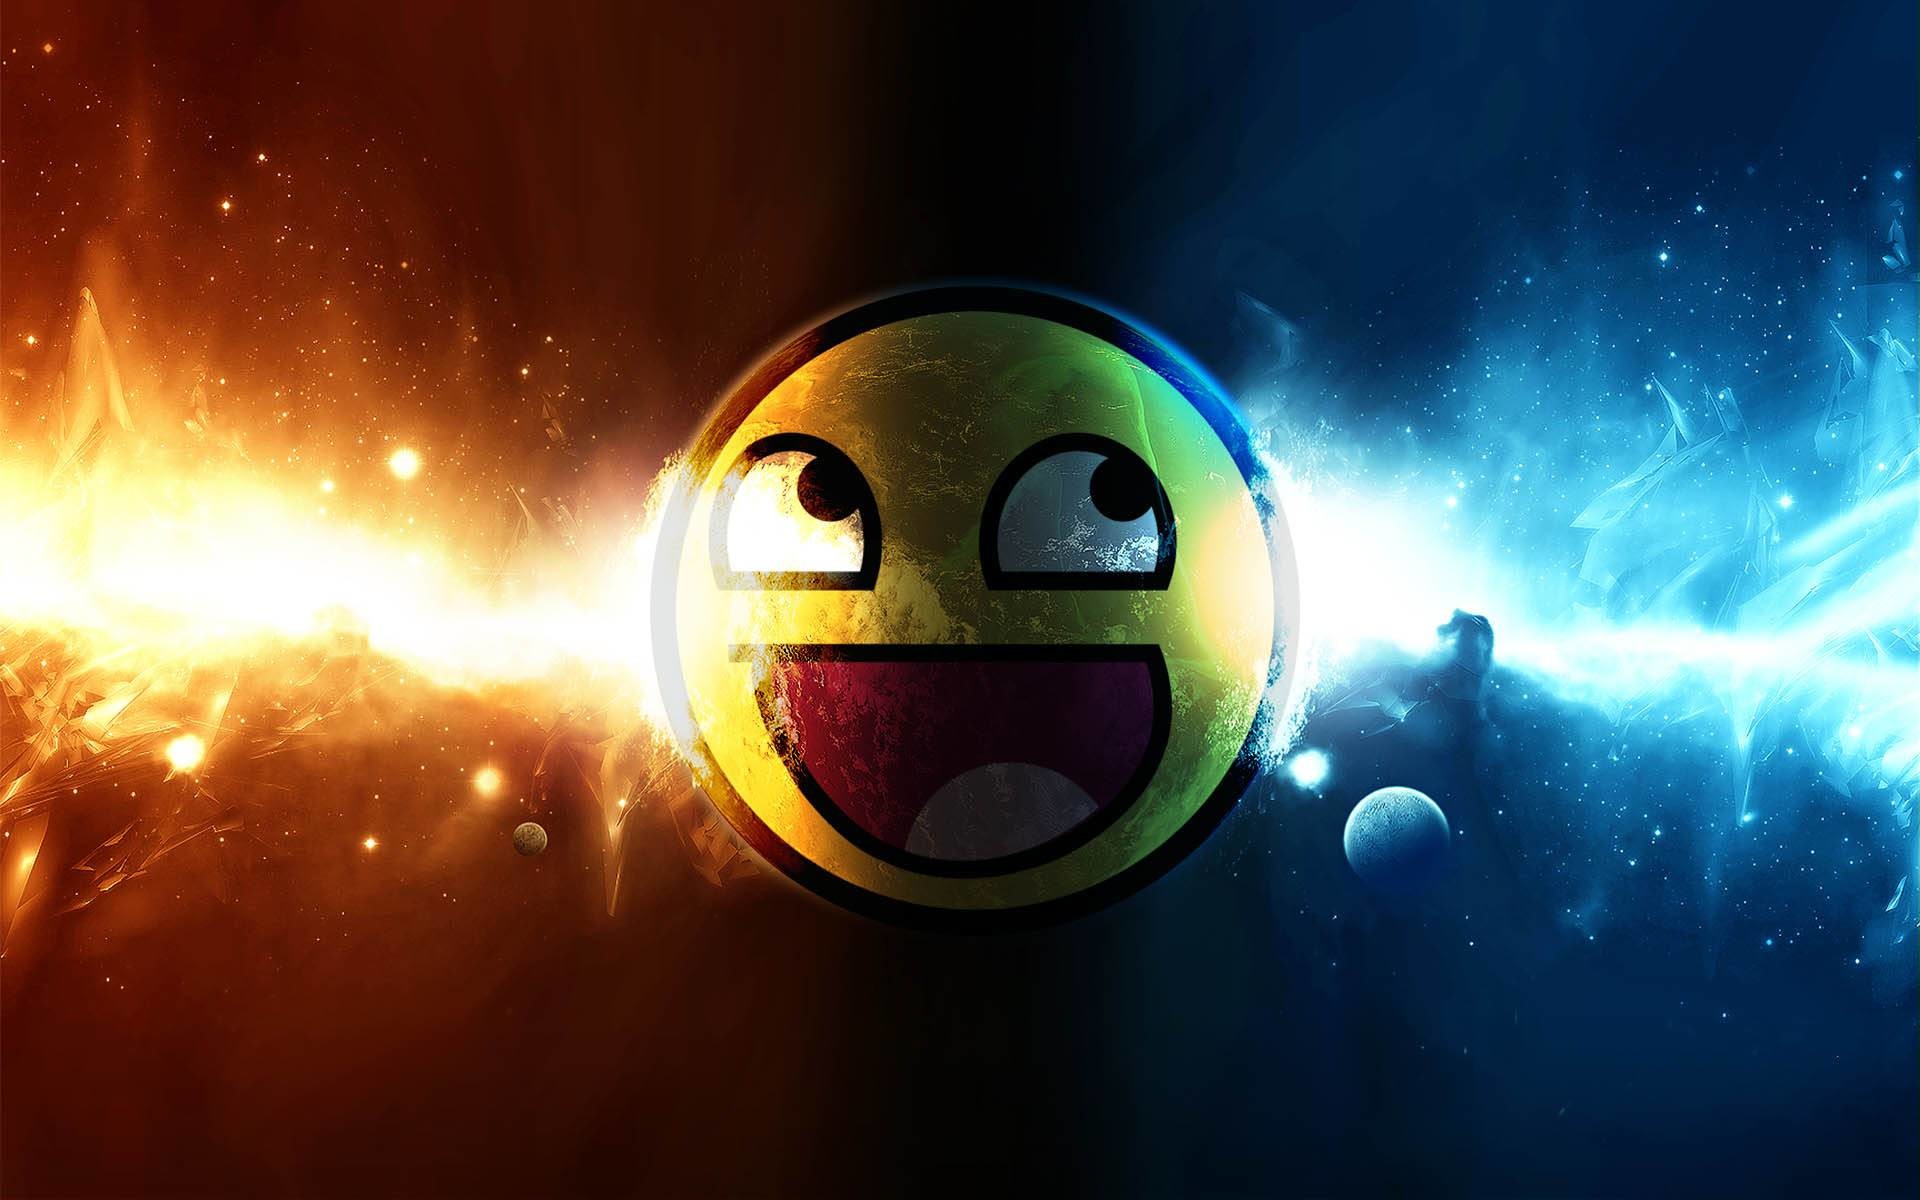 1920x1200 Awesome Smiley Background 2225 Hd Wallpapers in Others Imagescicom 